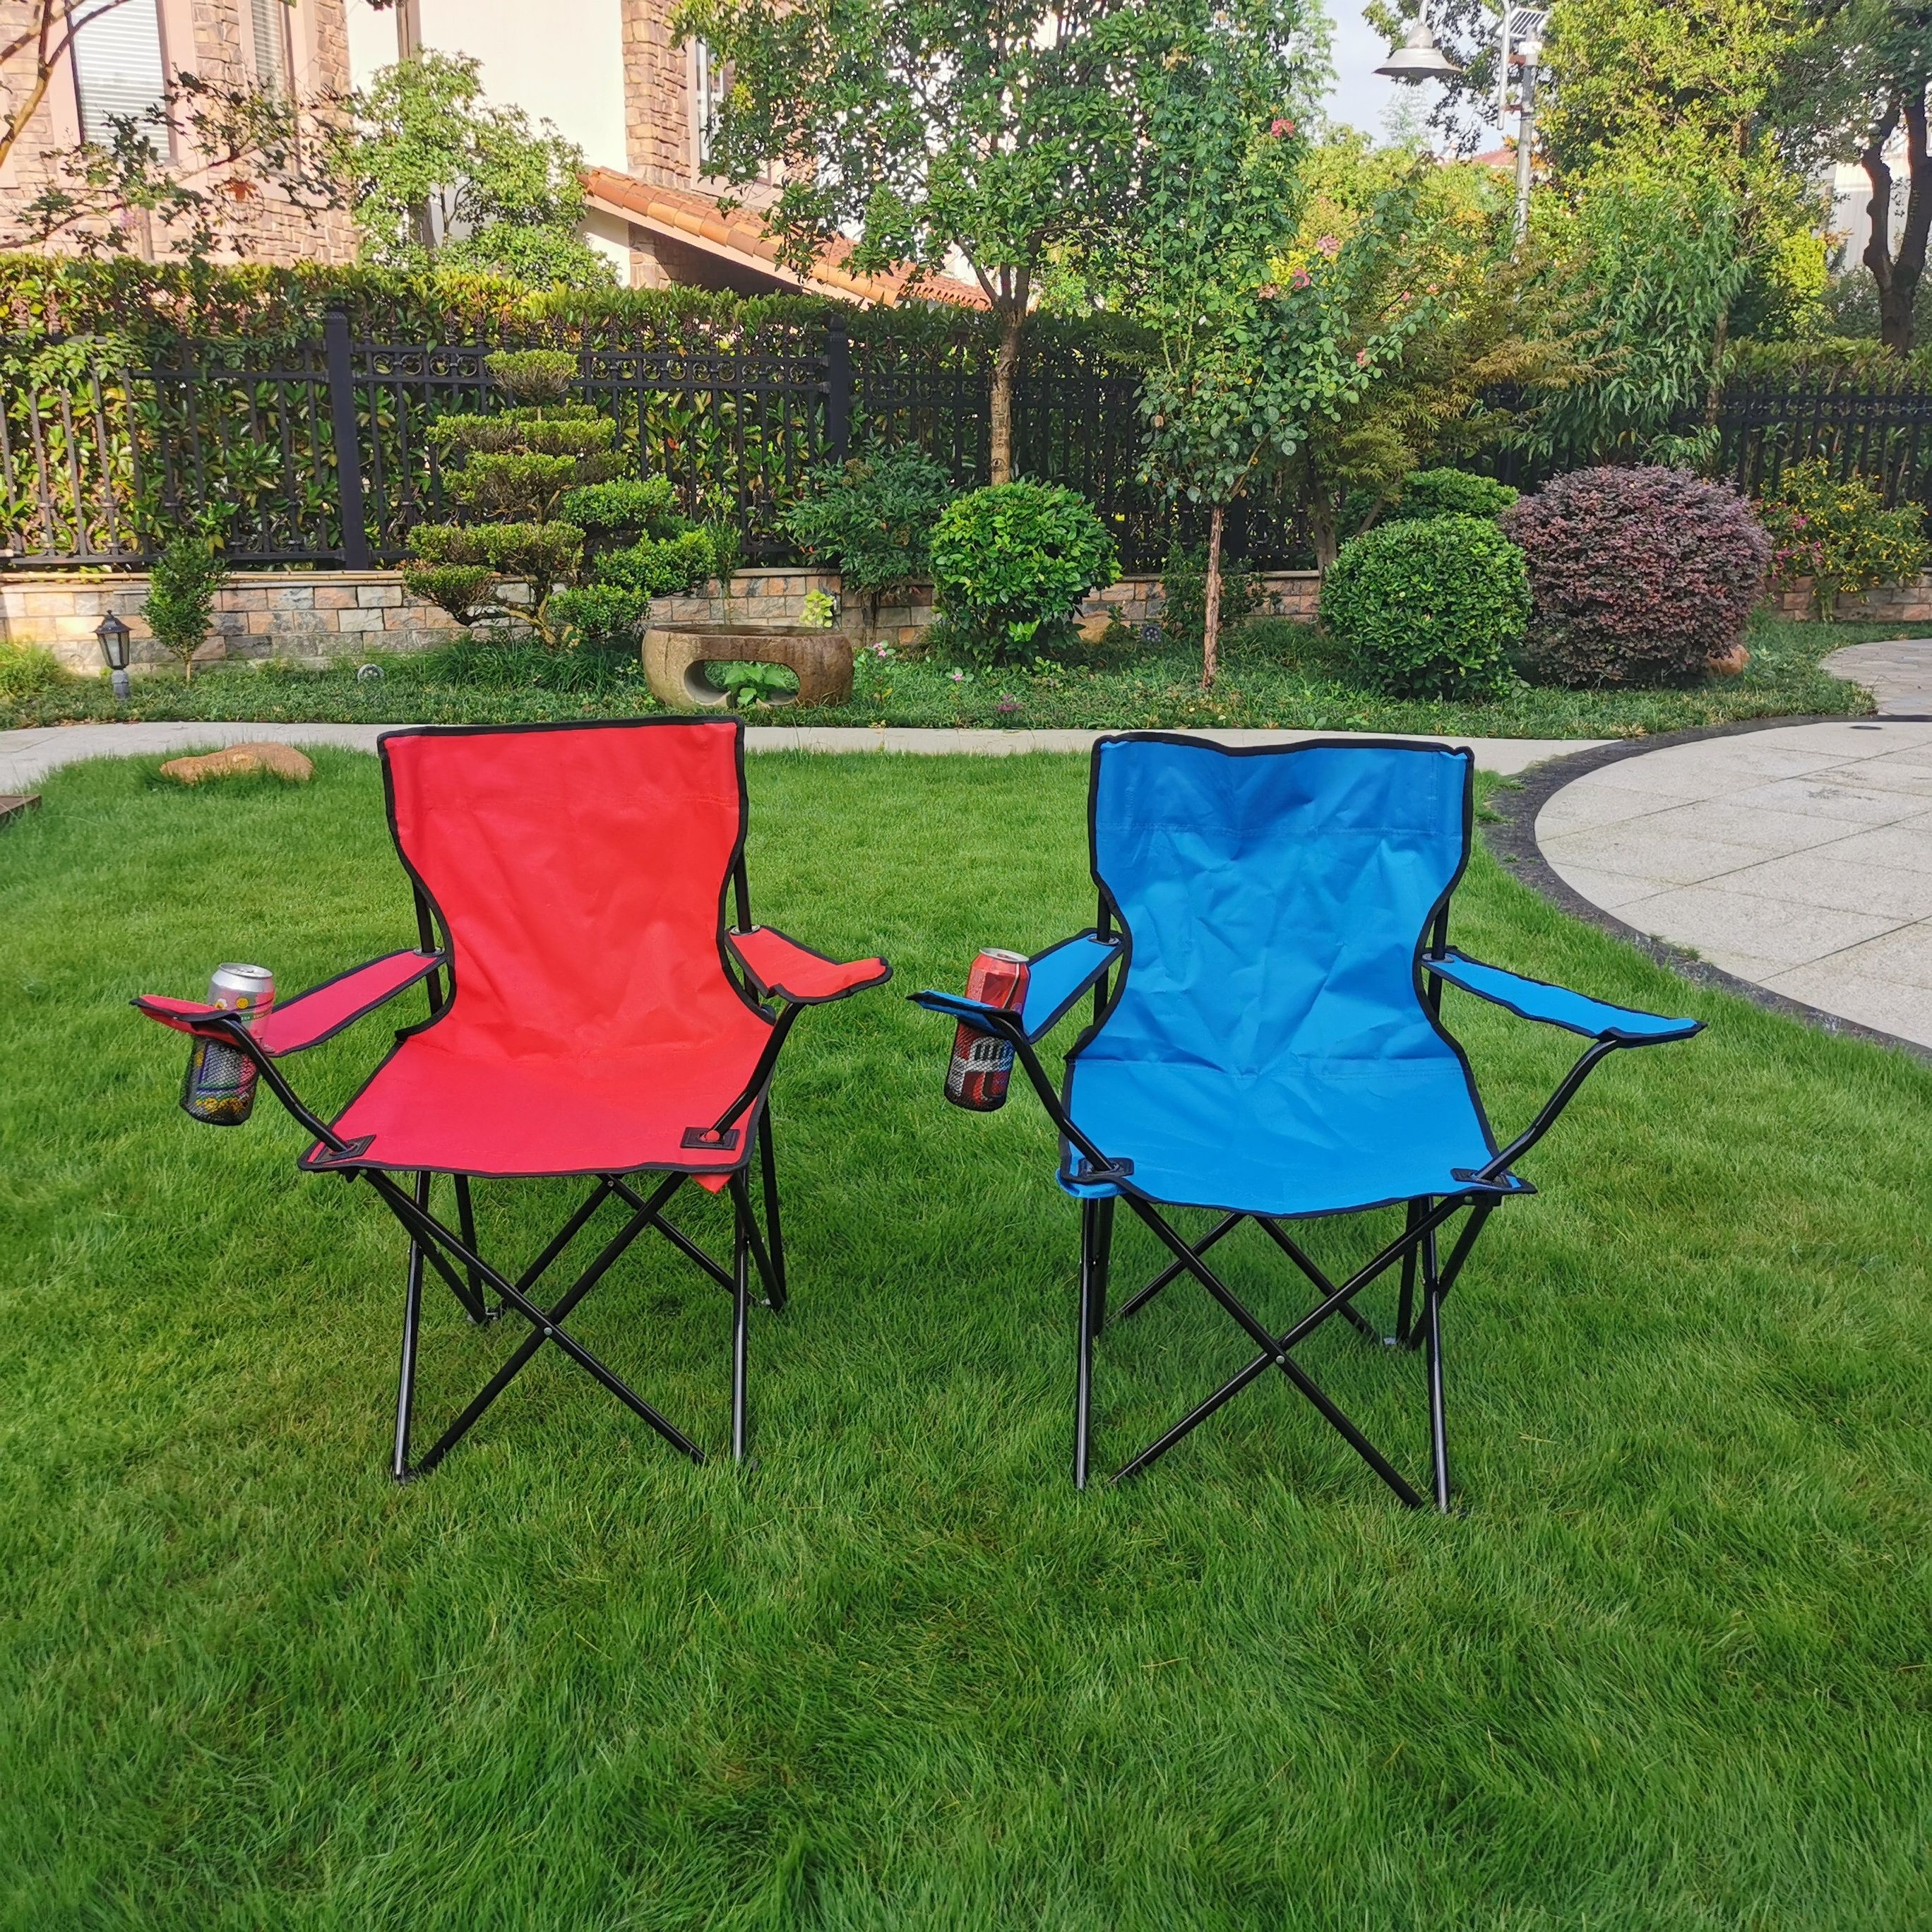 Small Folding Chair Kids Lawn Chair Portable Compact Outdoor Camping Chair